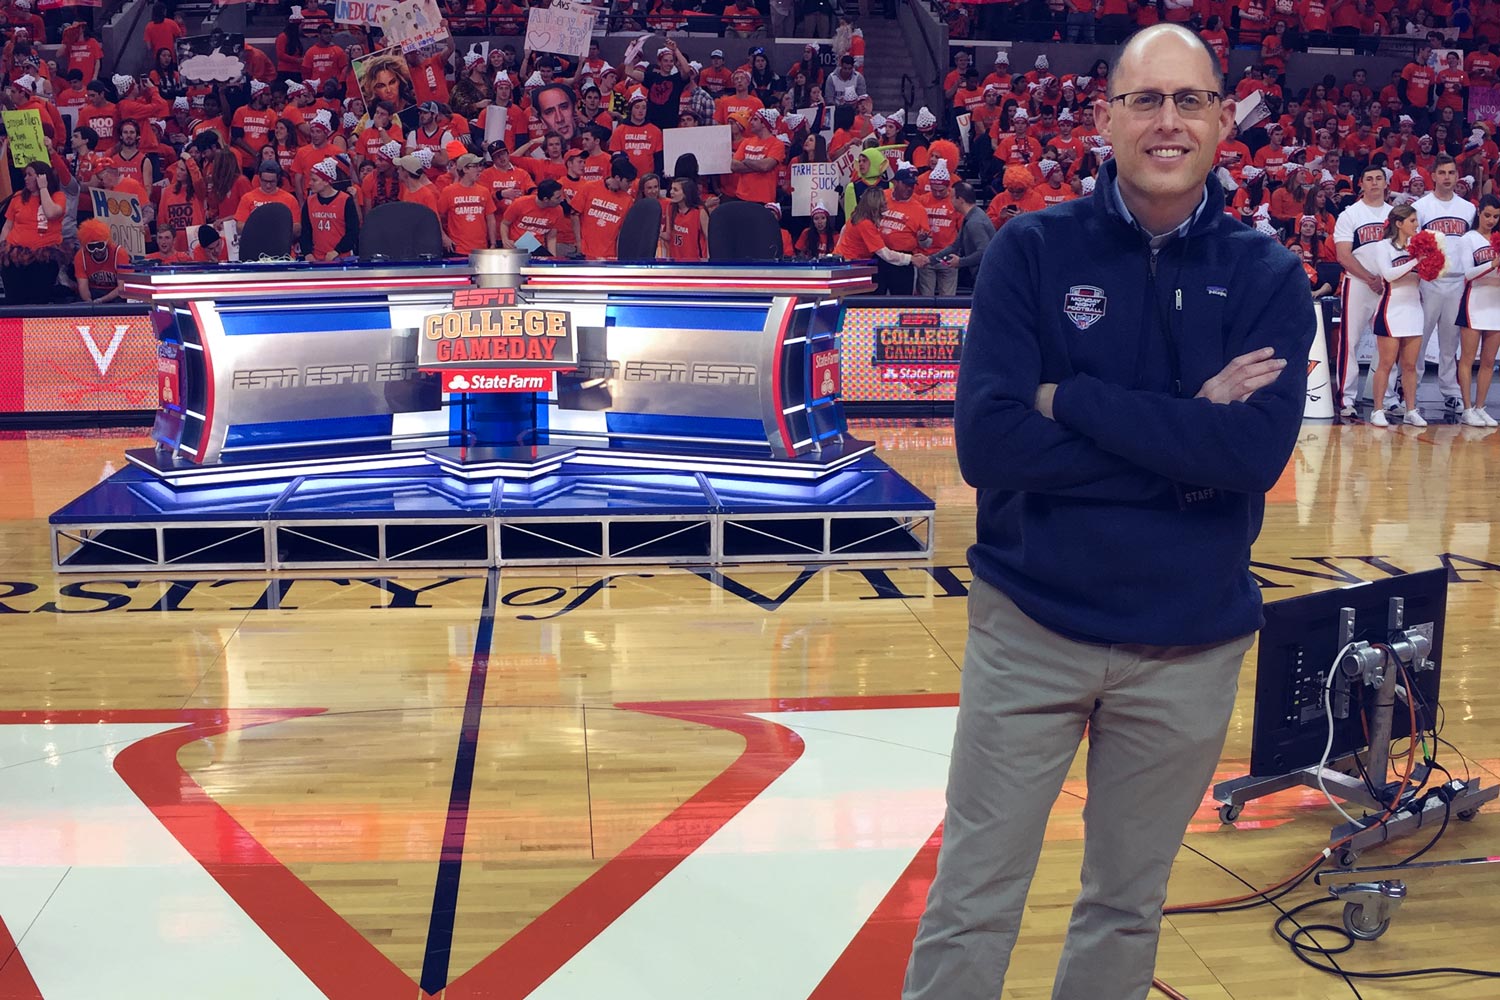 Bill Hofheimer standing on the basketball court with the College Gameday stage behind him